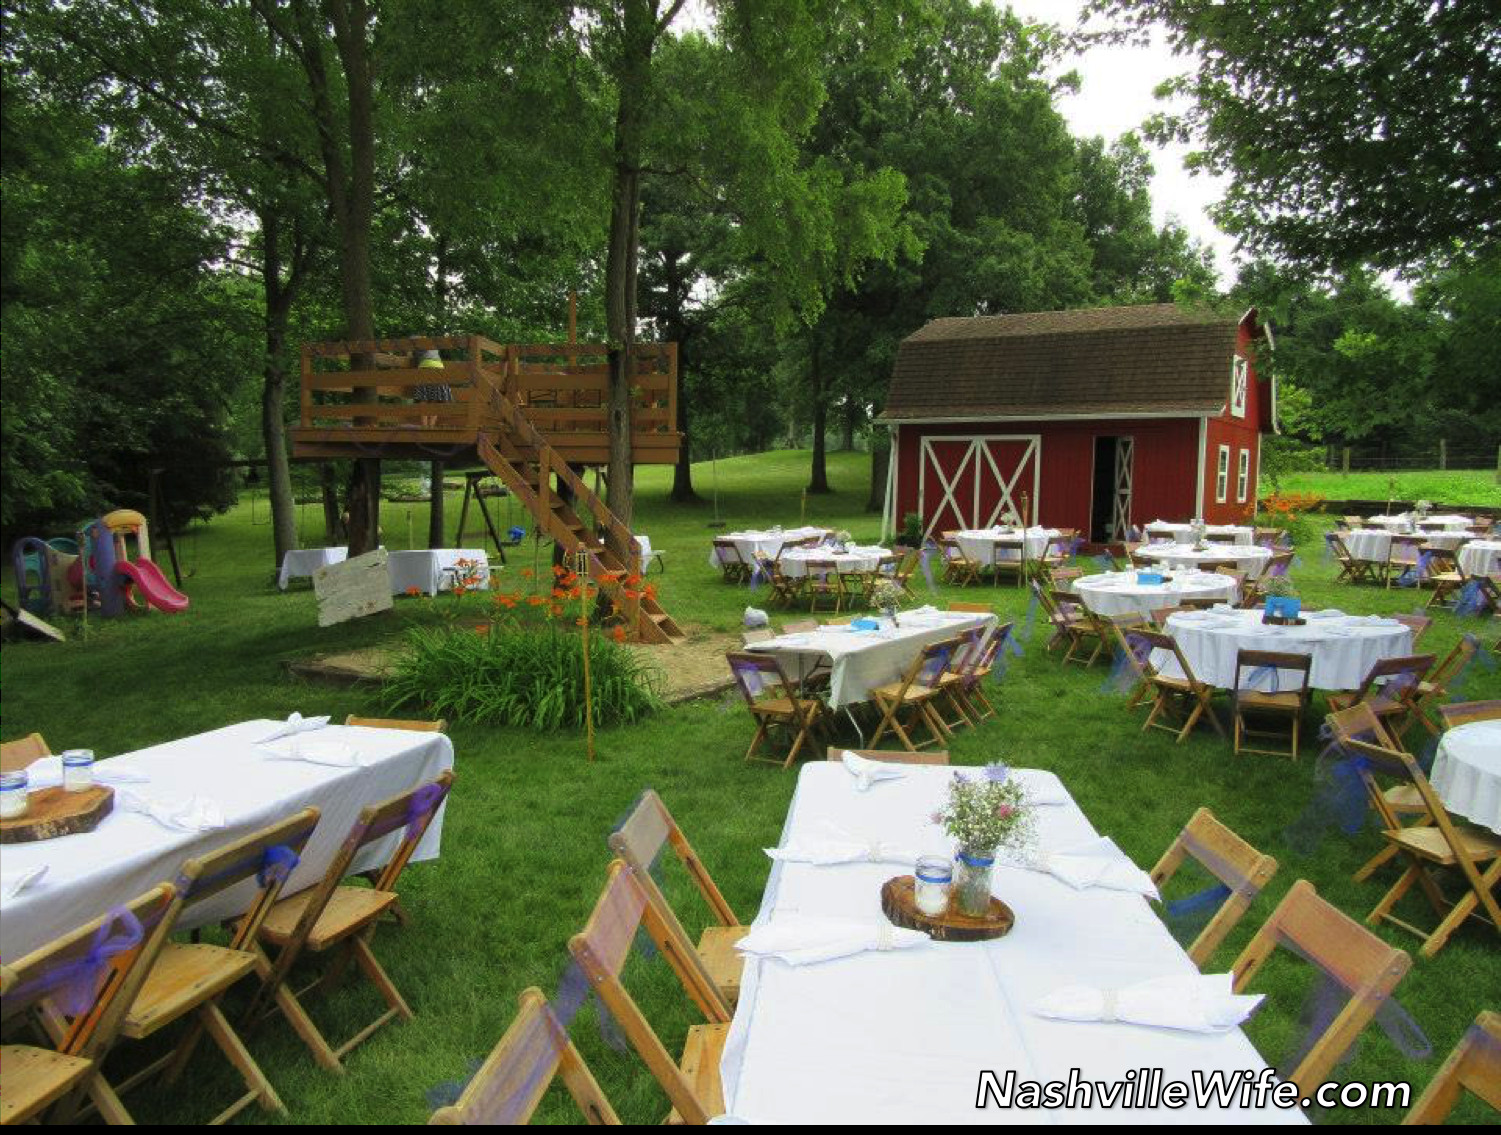 DIY Wedding Reception
 DIY Wedding Reception Nashville Wife